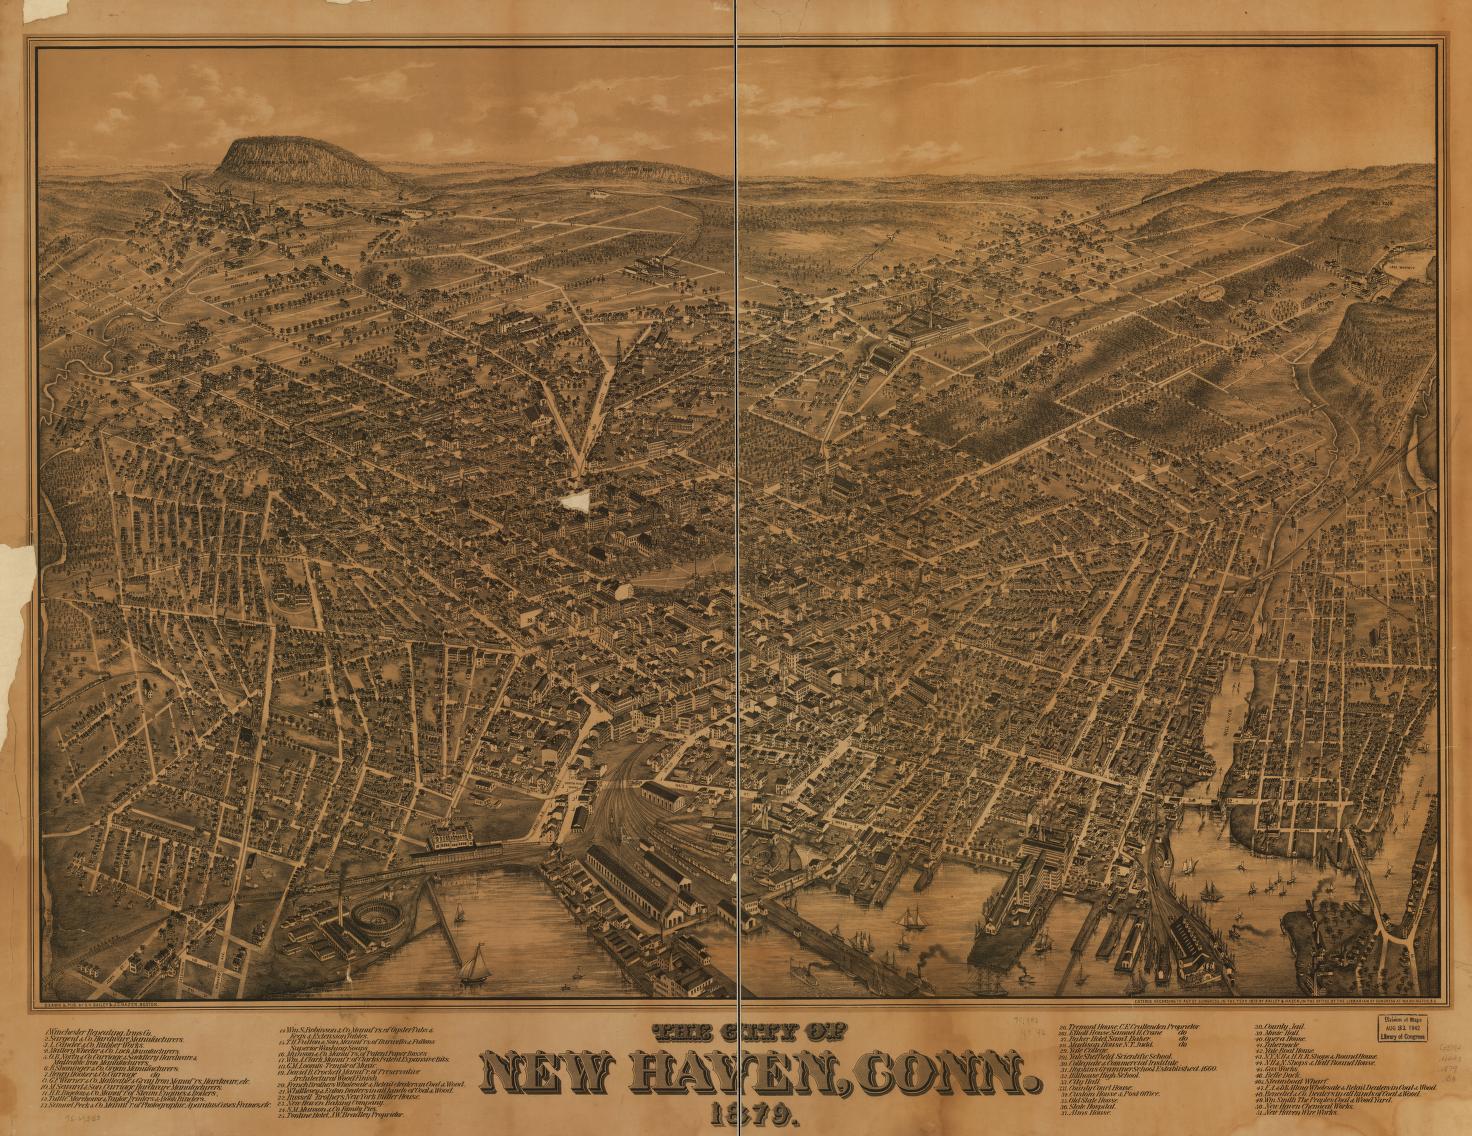 New Haven, CT in 1879